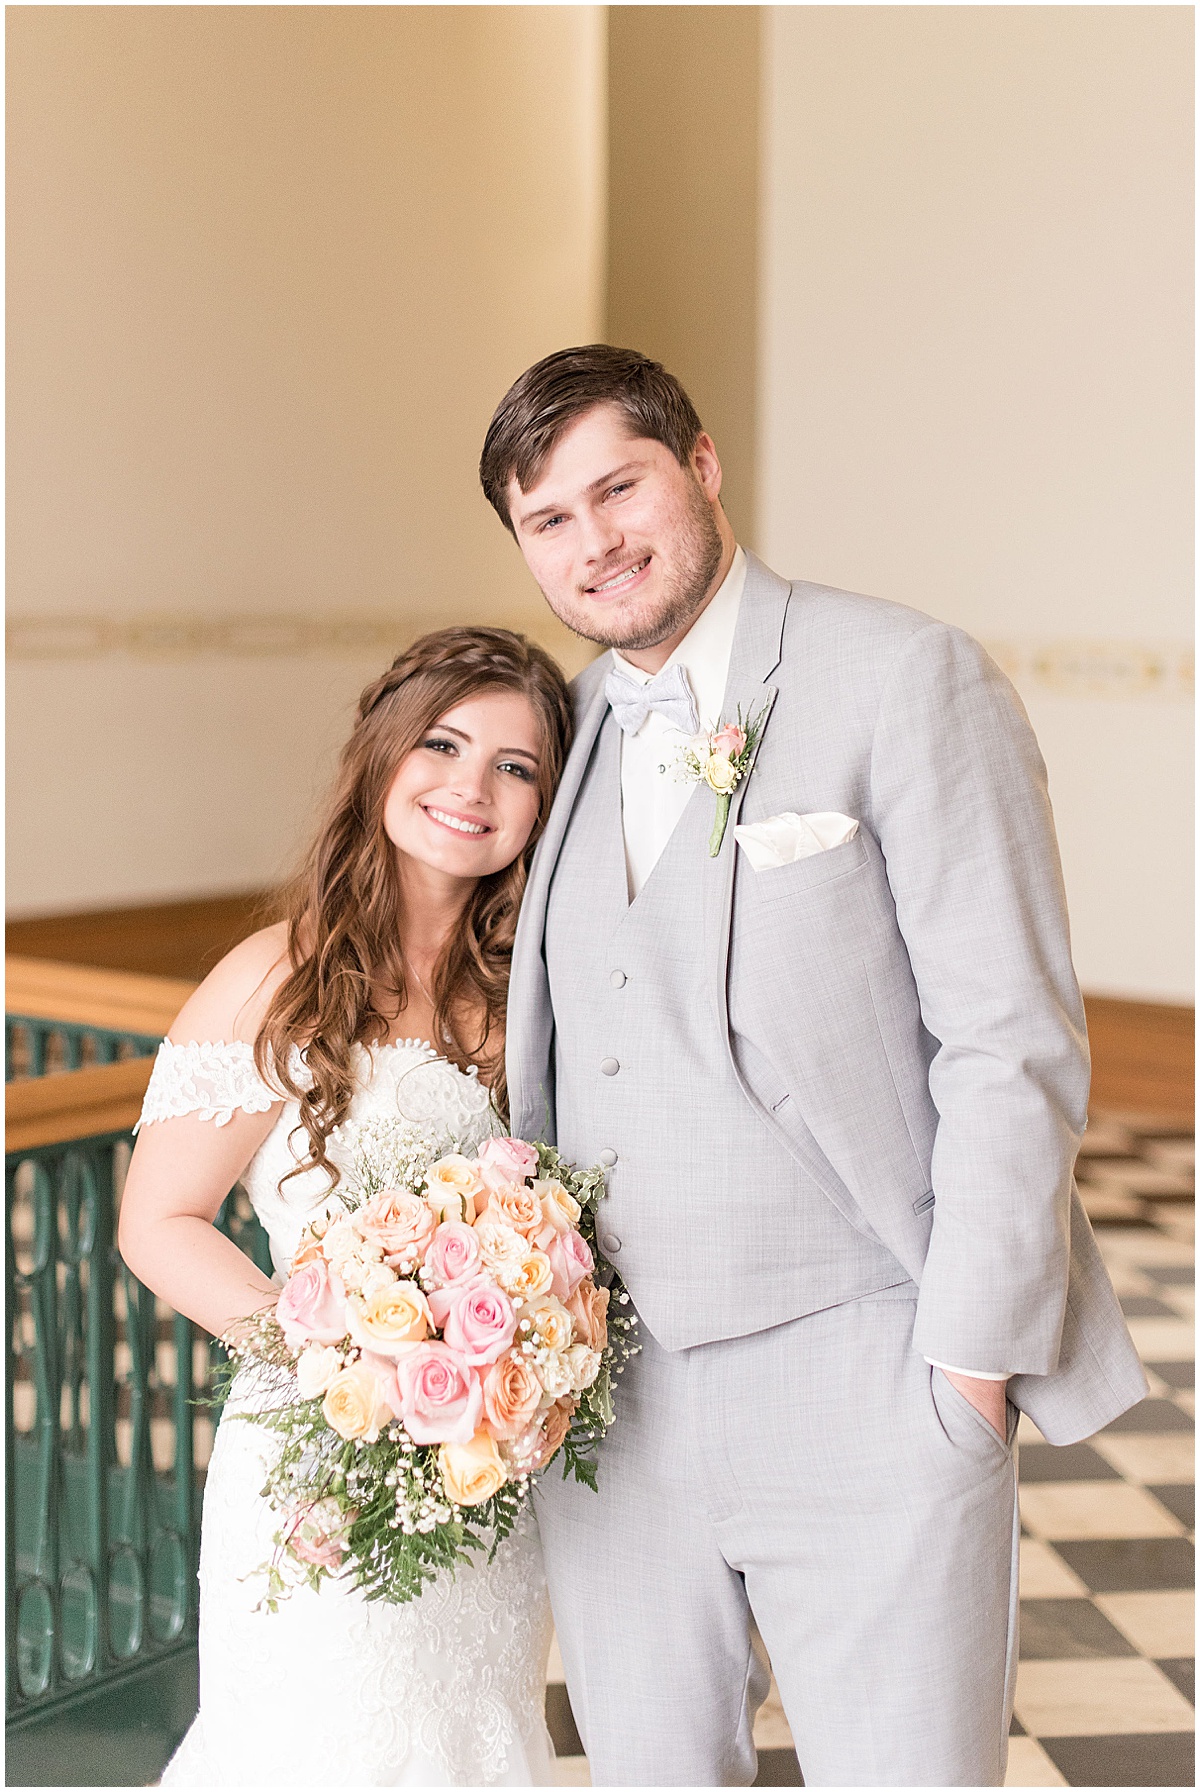 Wedding in Crown Point, Indiana photographed by Victoria Rayburn Photography